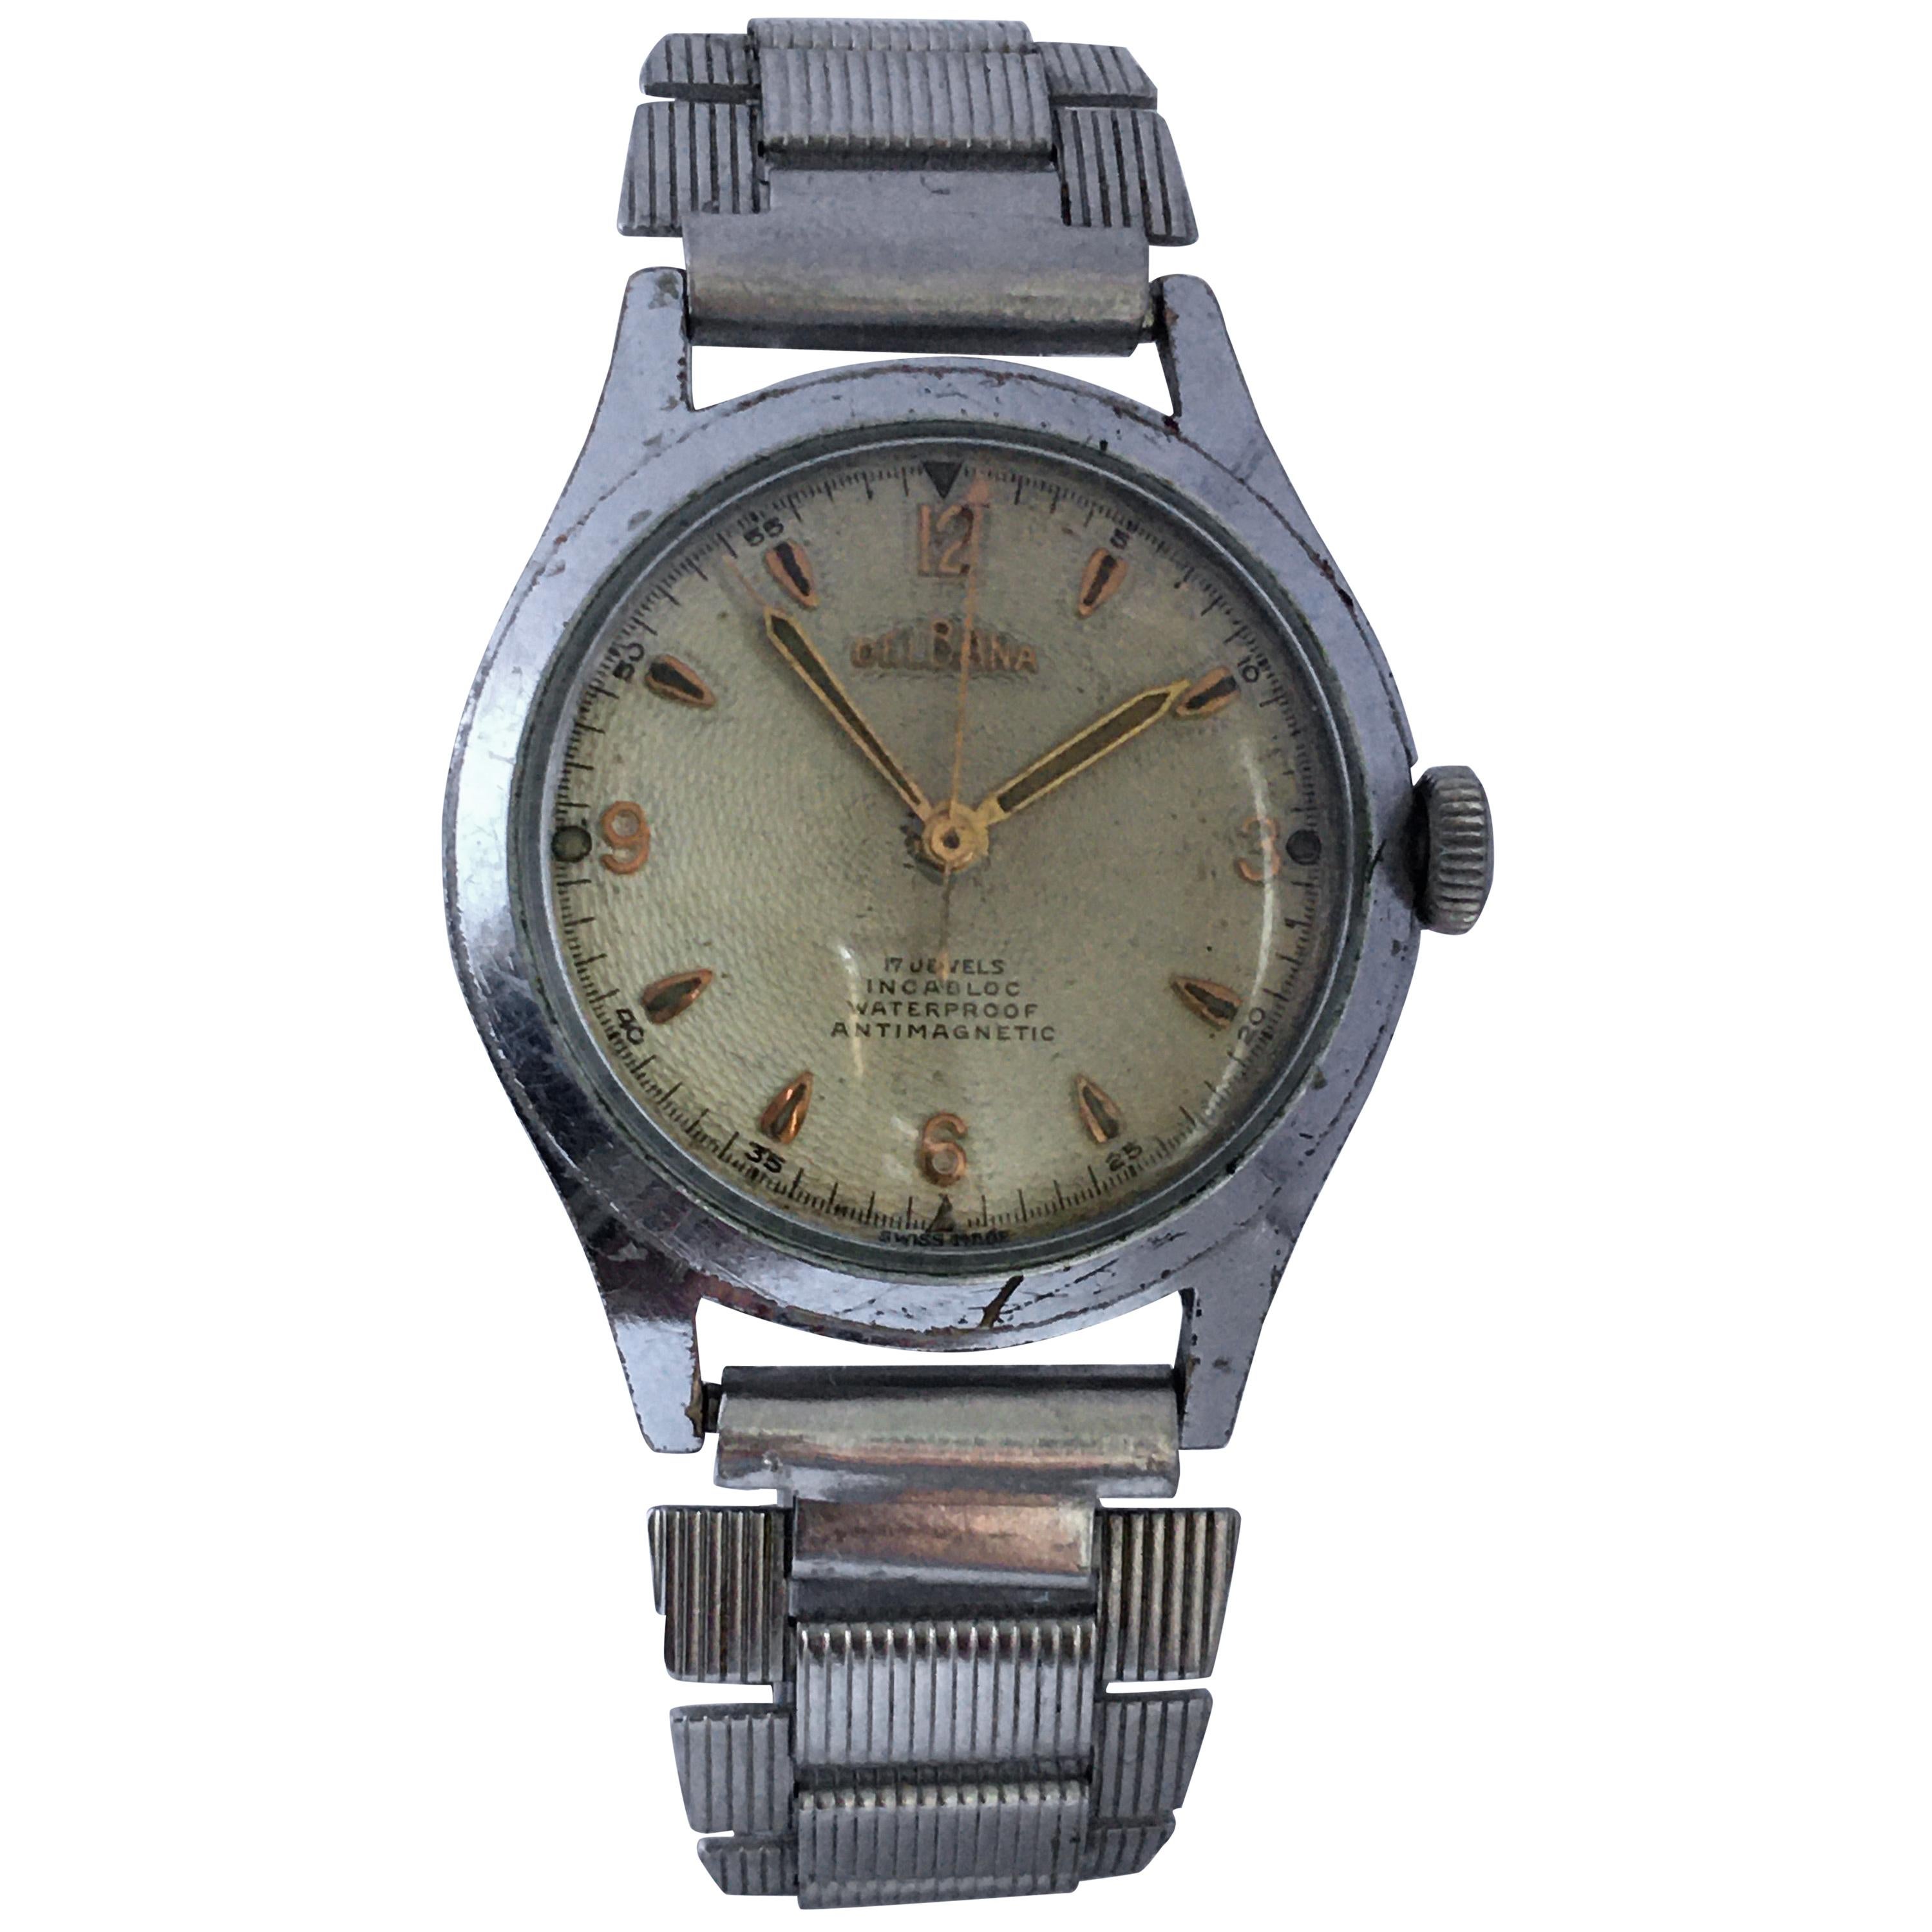 1950s Vintage Stainless Steel DELBANA Mechanical Watch For Sale